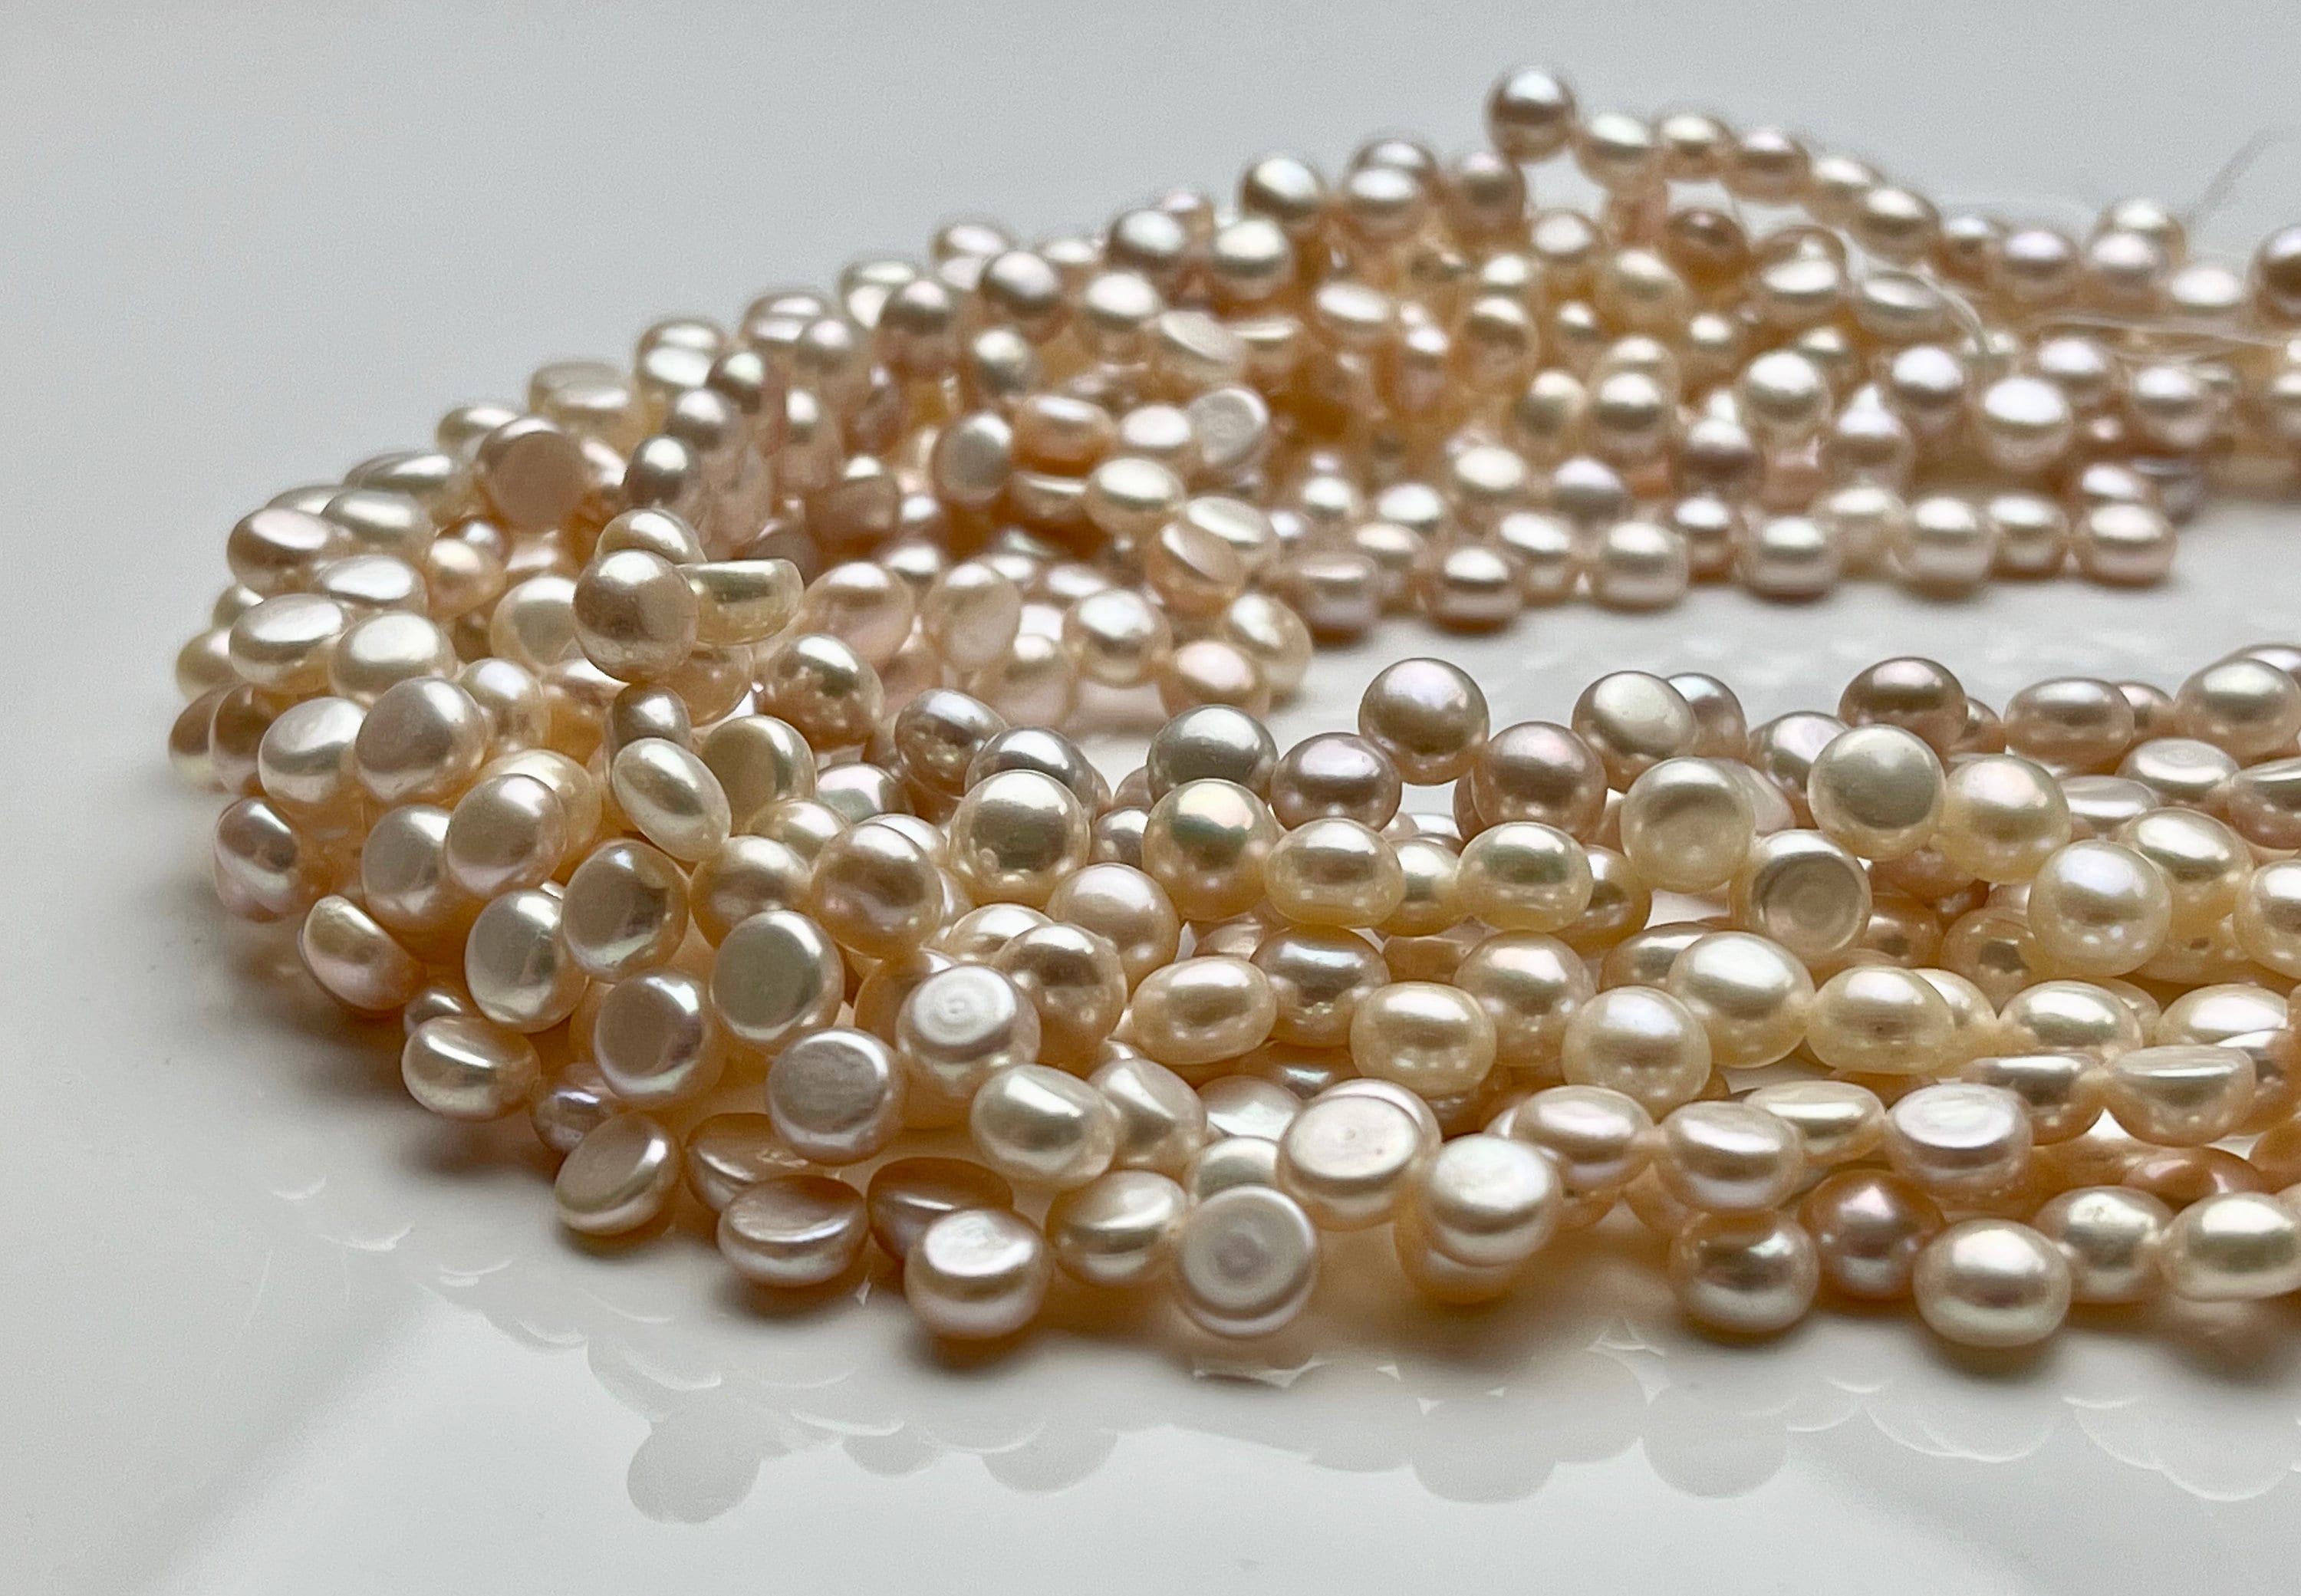 5 mm AAA Large Hole Champagne Color Round Button Freshwater Pearls Hole  Size 1.5 mm Genuine Large Hole Rondelle Freshwater Pearl Beads #1845